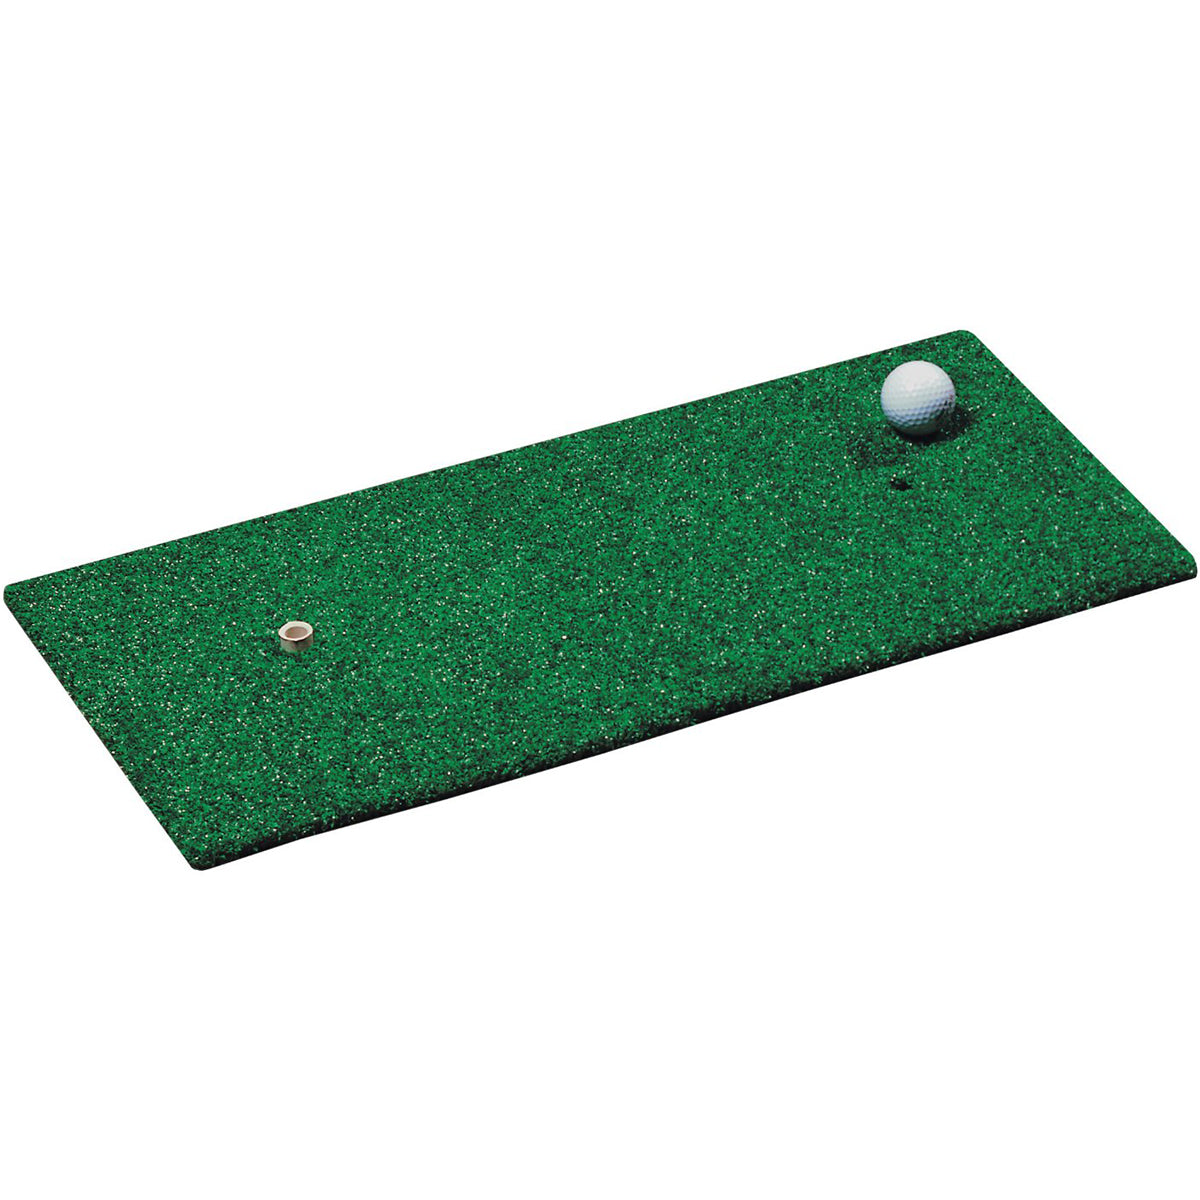 IZZO 1' x 2' Chipping and Driving Practice Golf Mat IZZO Golf